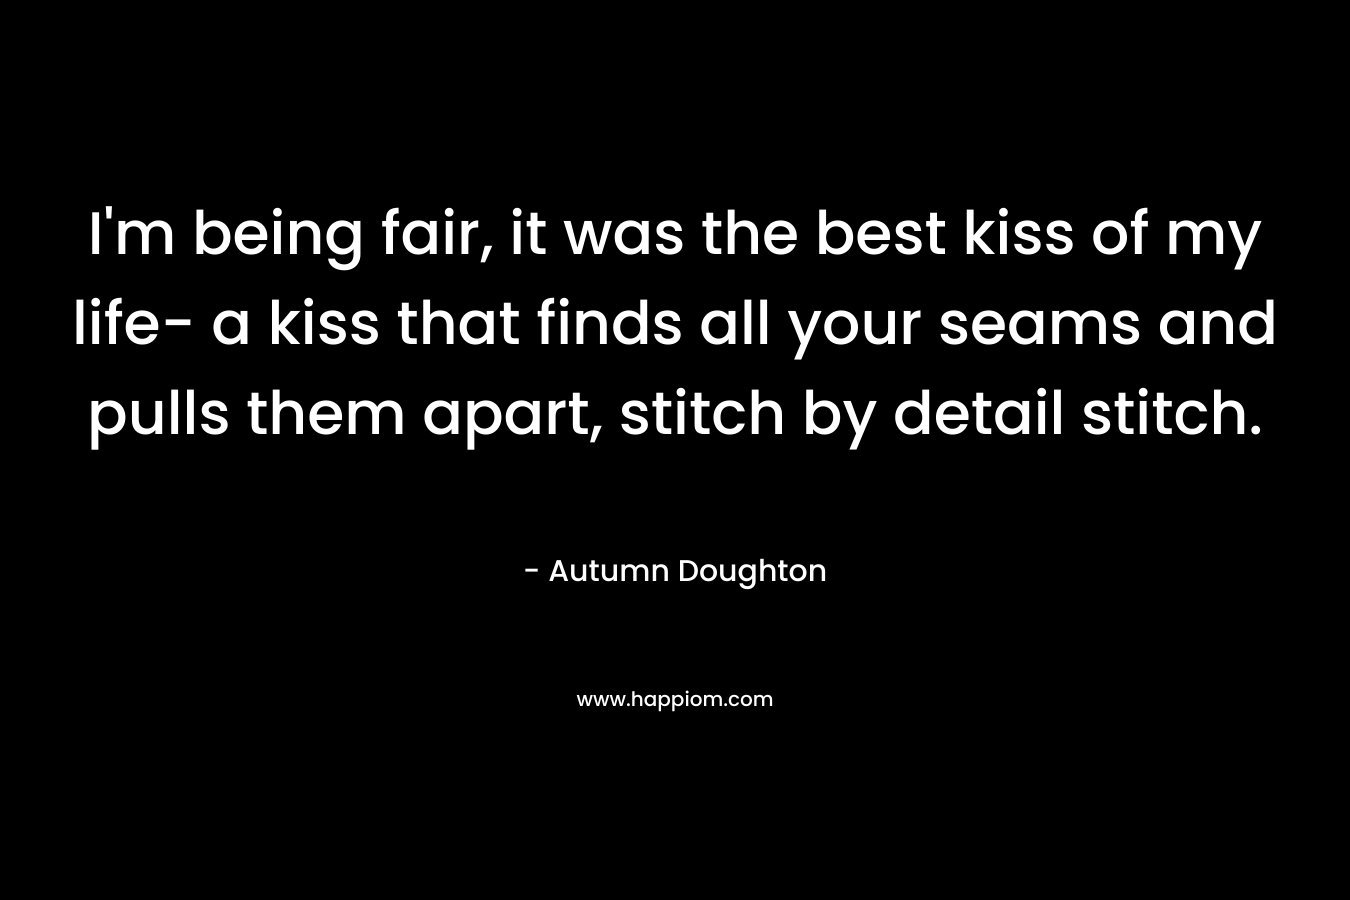 I’m being fair, it was the best kiss of my life- a kiss that finds all your seams and pulls them apart, stitch by detail stitch. – Autumn Doughton